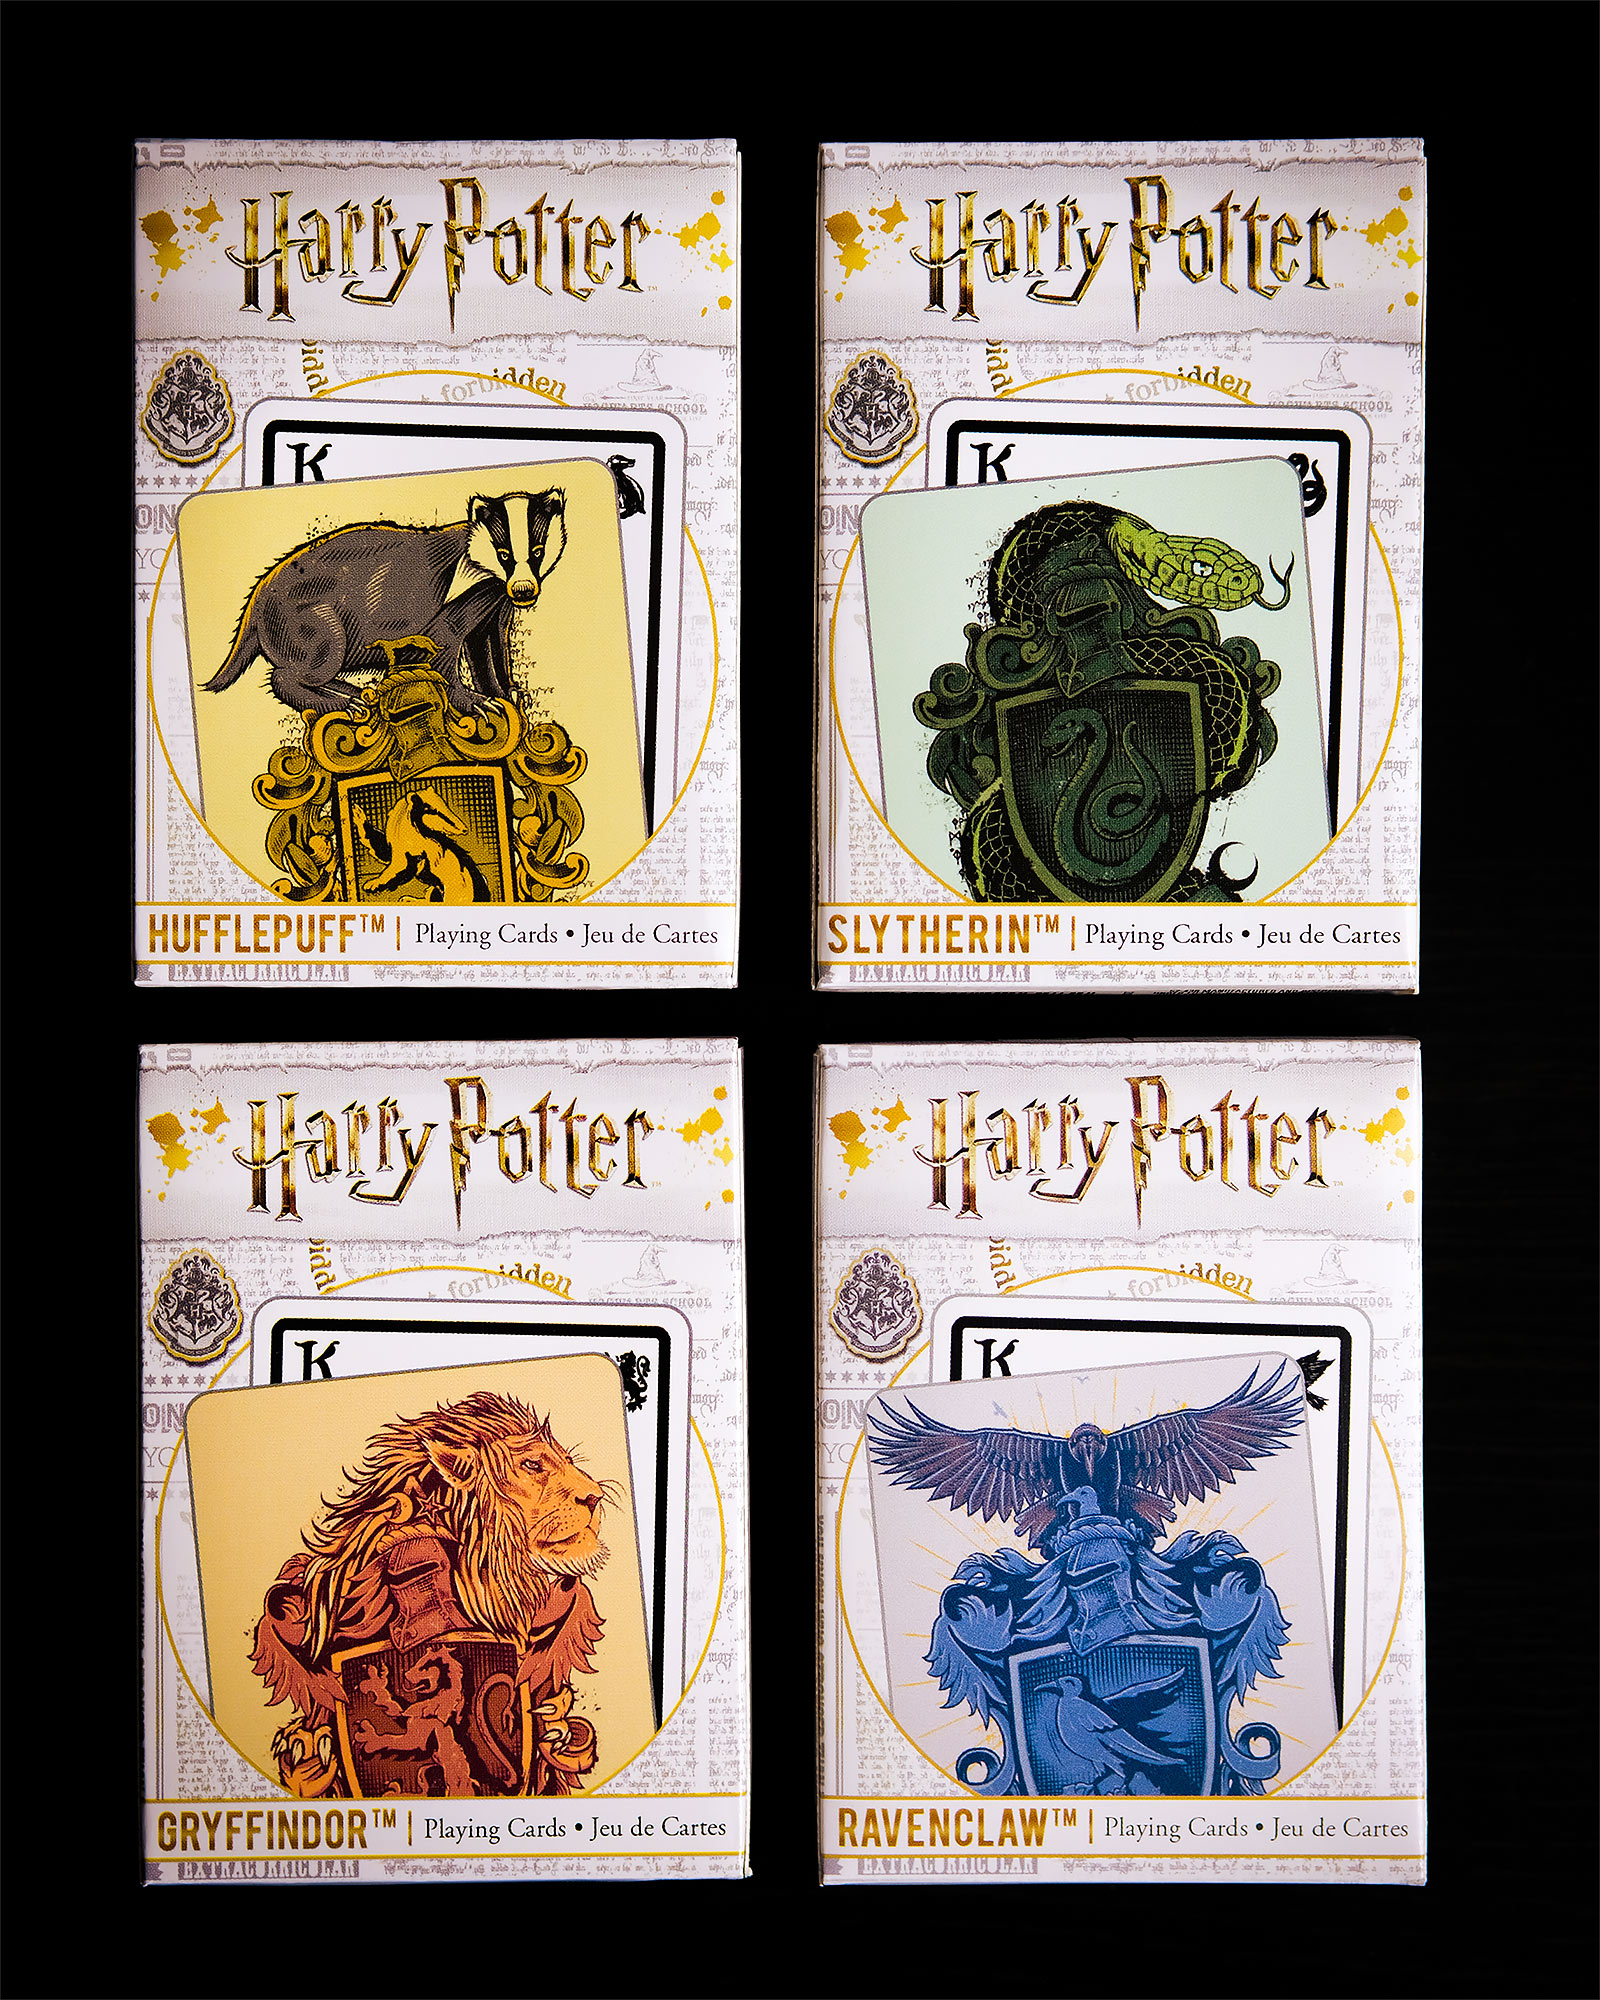 Harry Potter - Ravenclaw Card Game